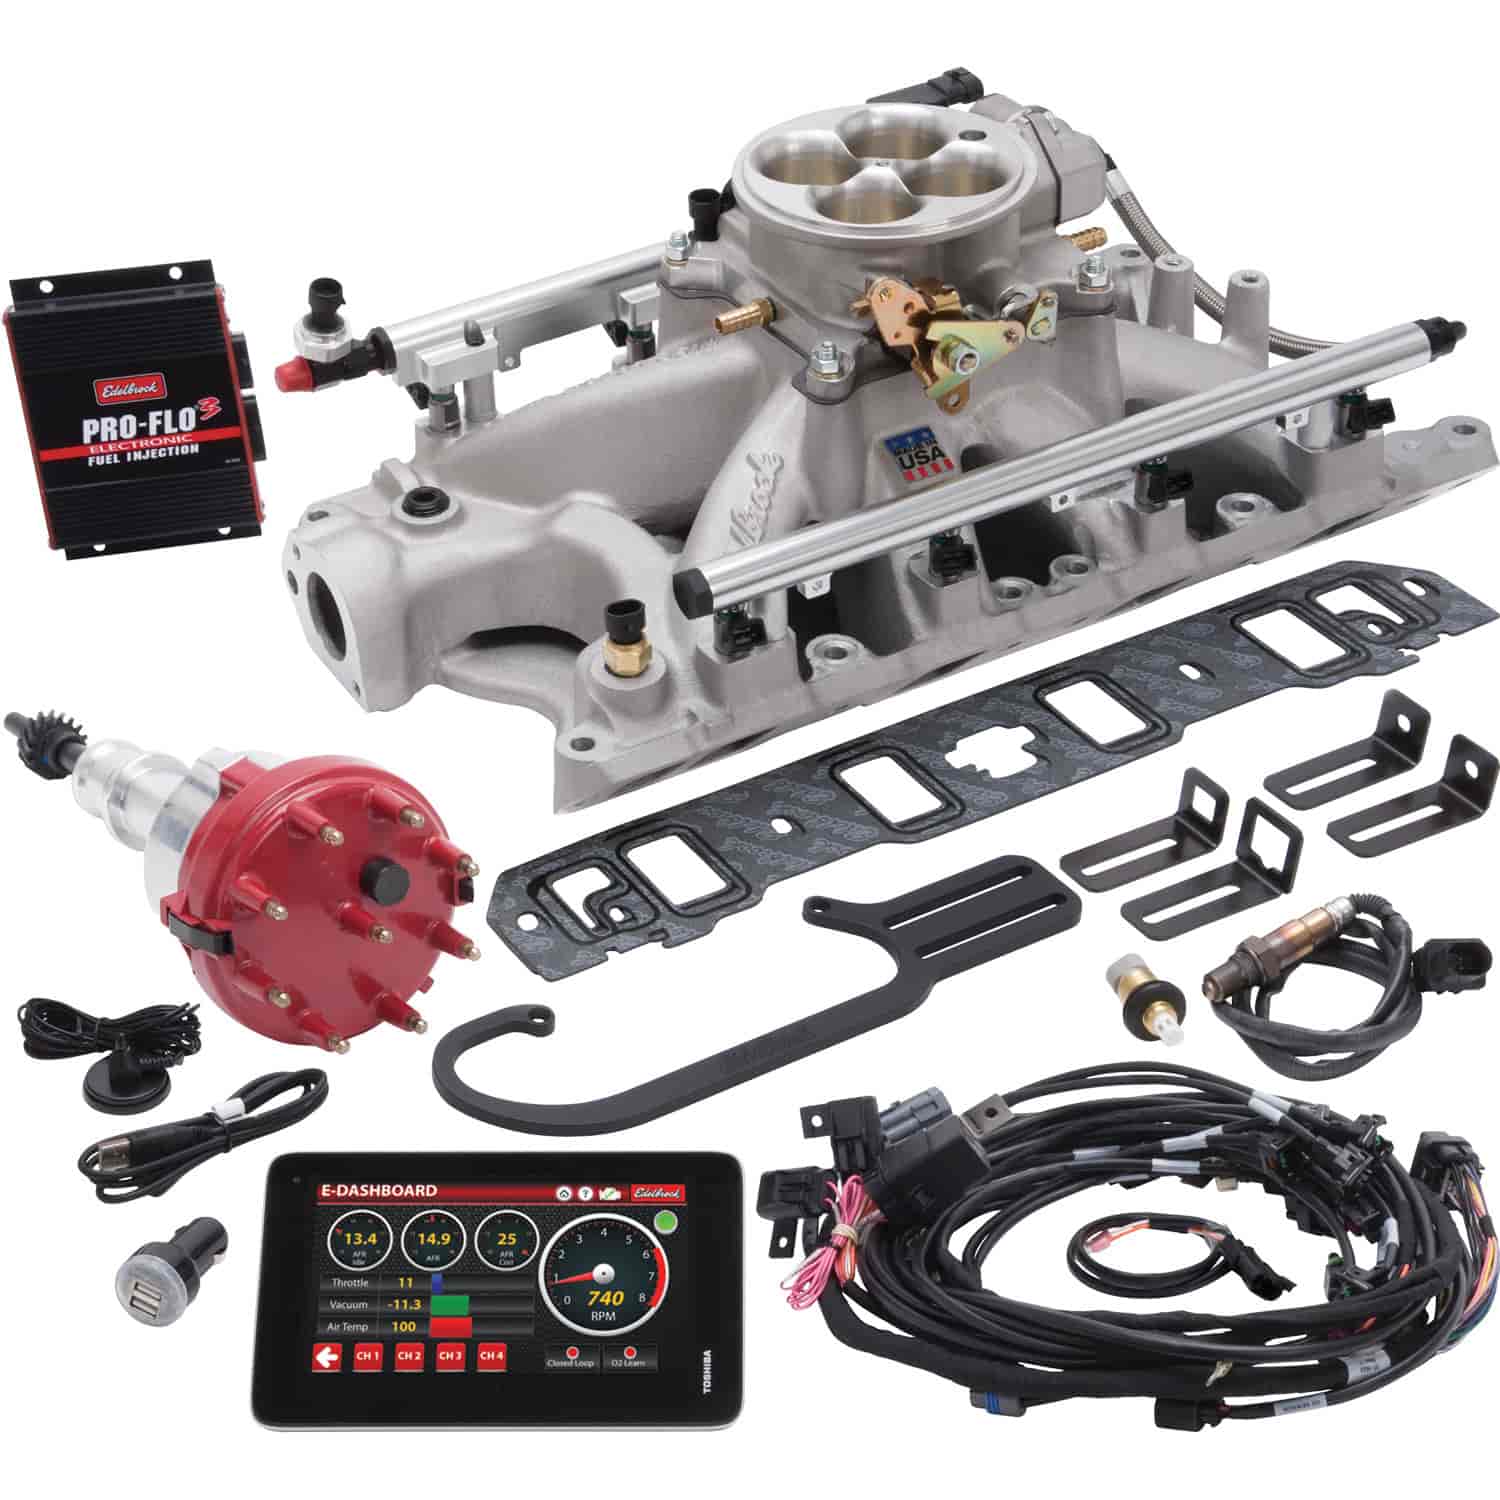 Pro-Flo 3 EFI System Small Block Ford 351W